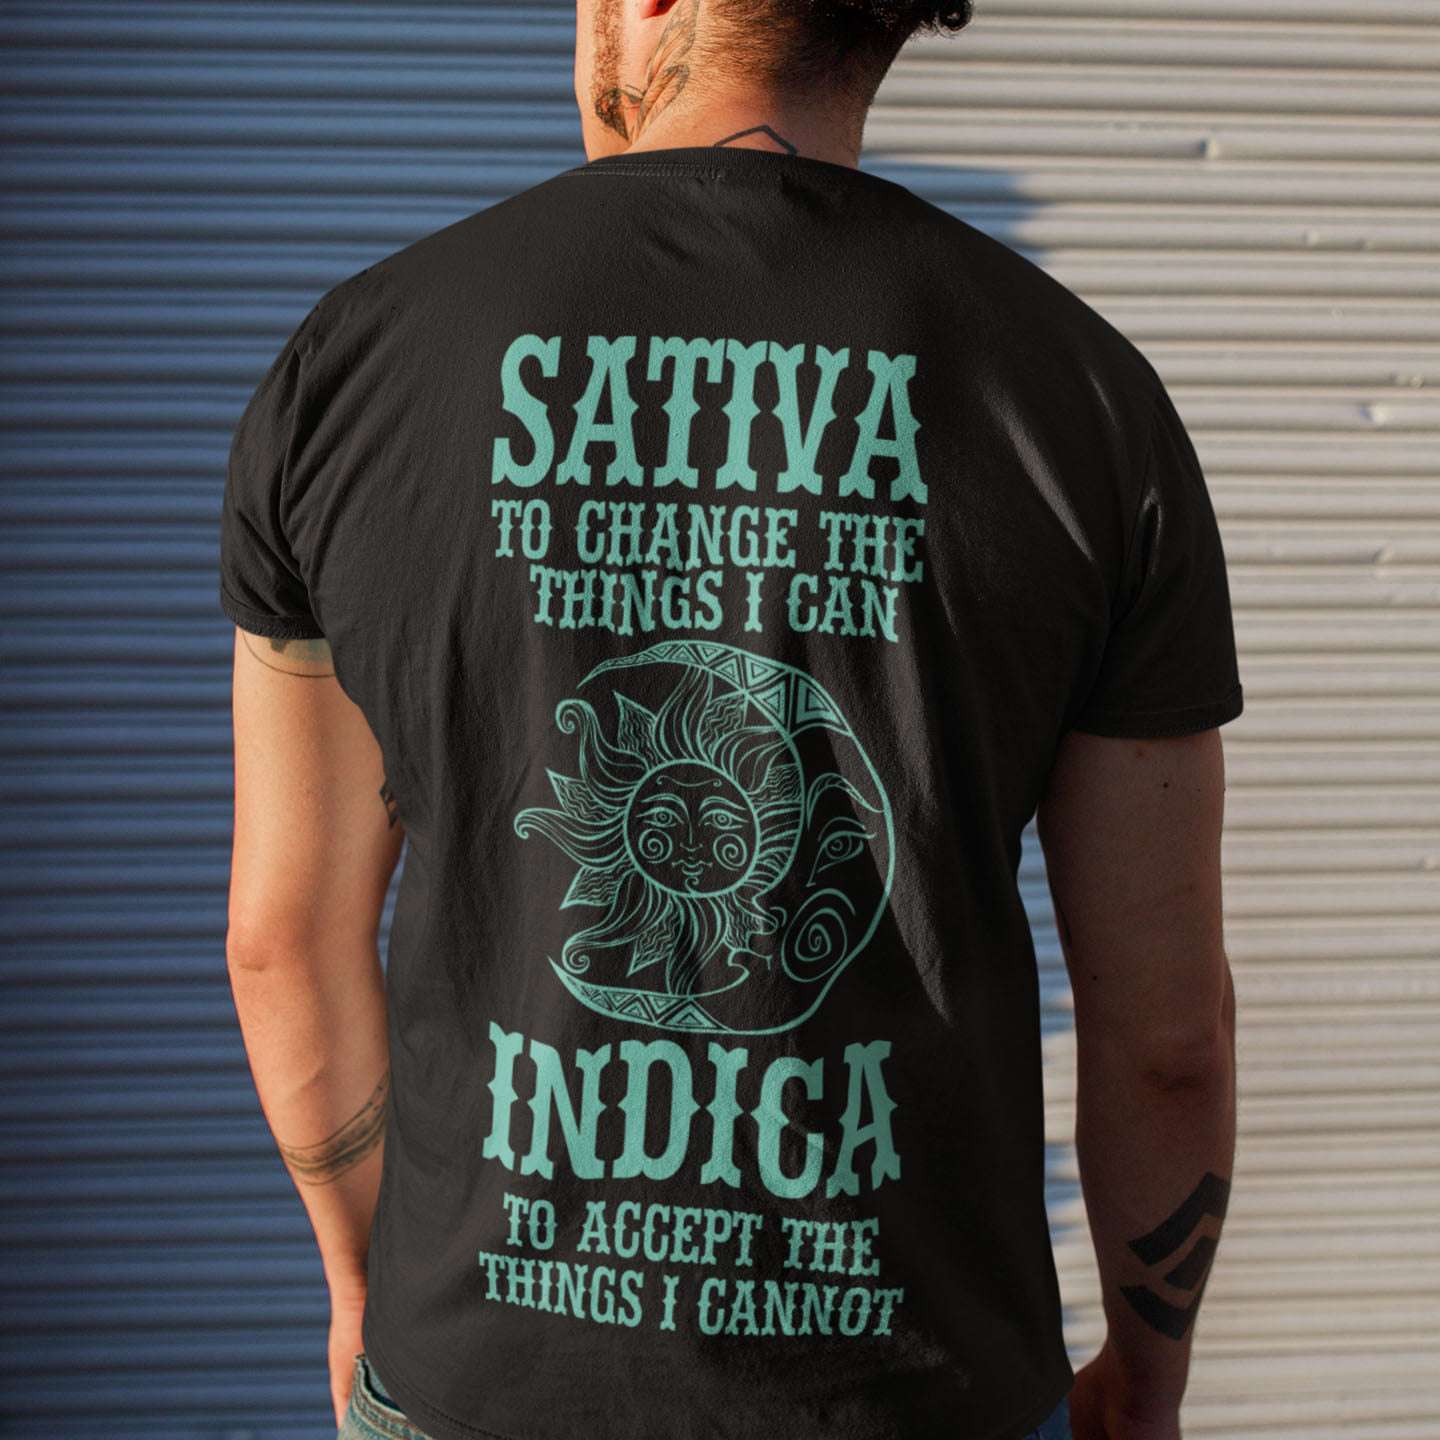 Sativa to change the things I can, Indica to accept the things I cannot - Sativa indica